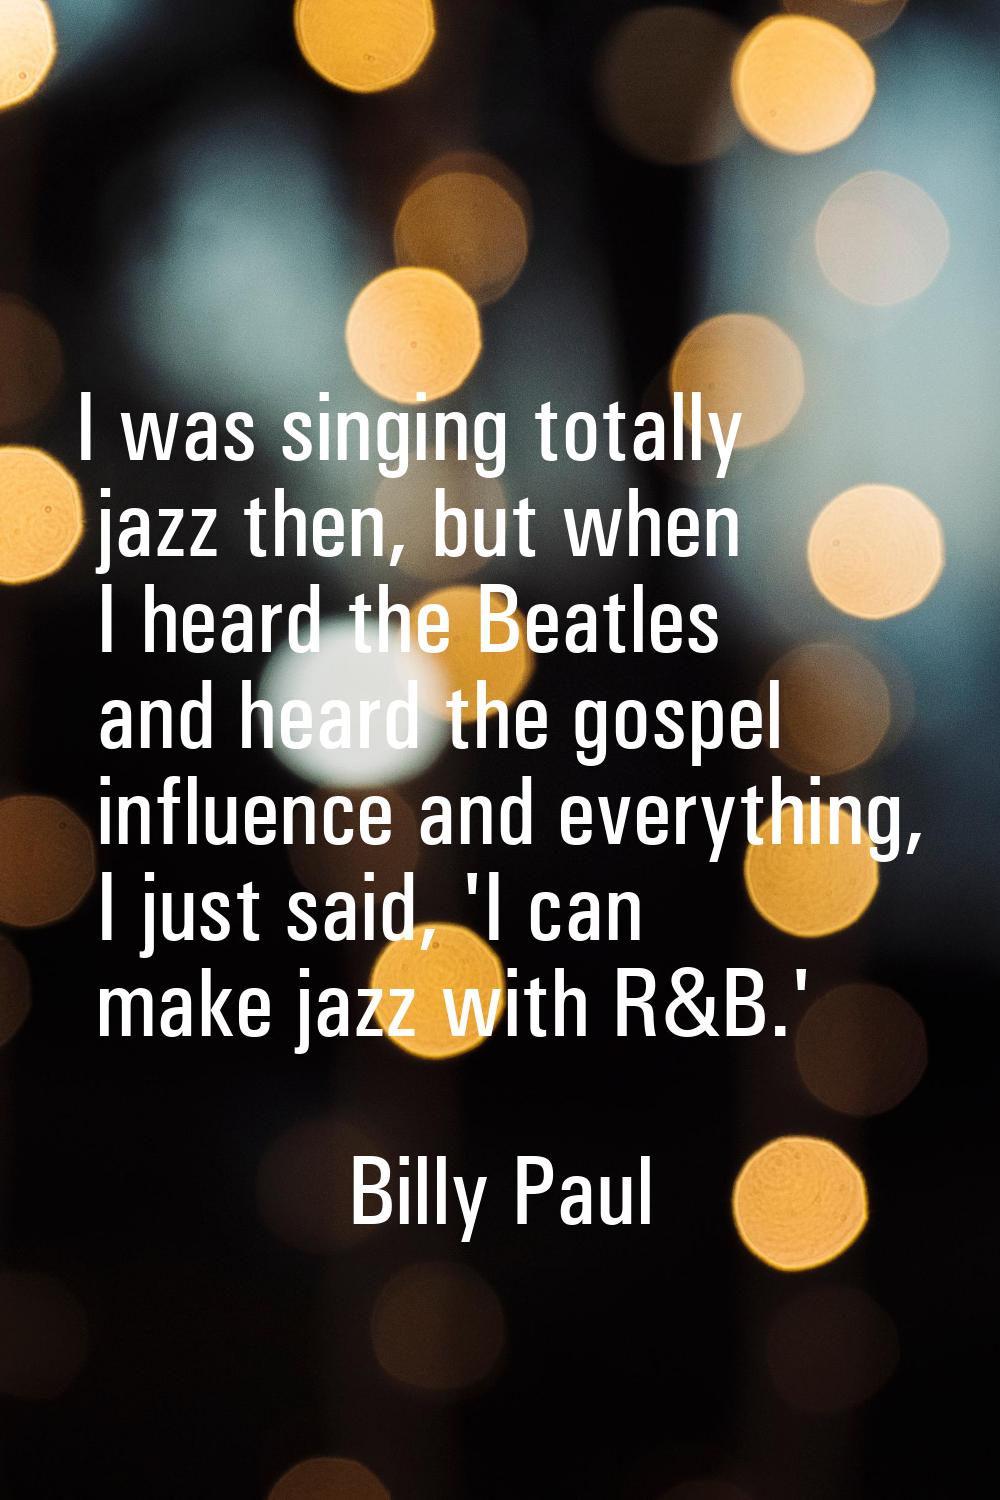 I was singing totally jazz then, but when I heard the Beatles and heard the gospel influence and ev